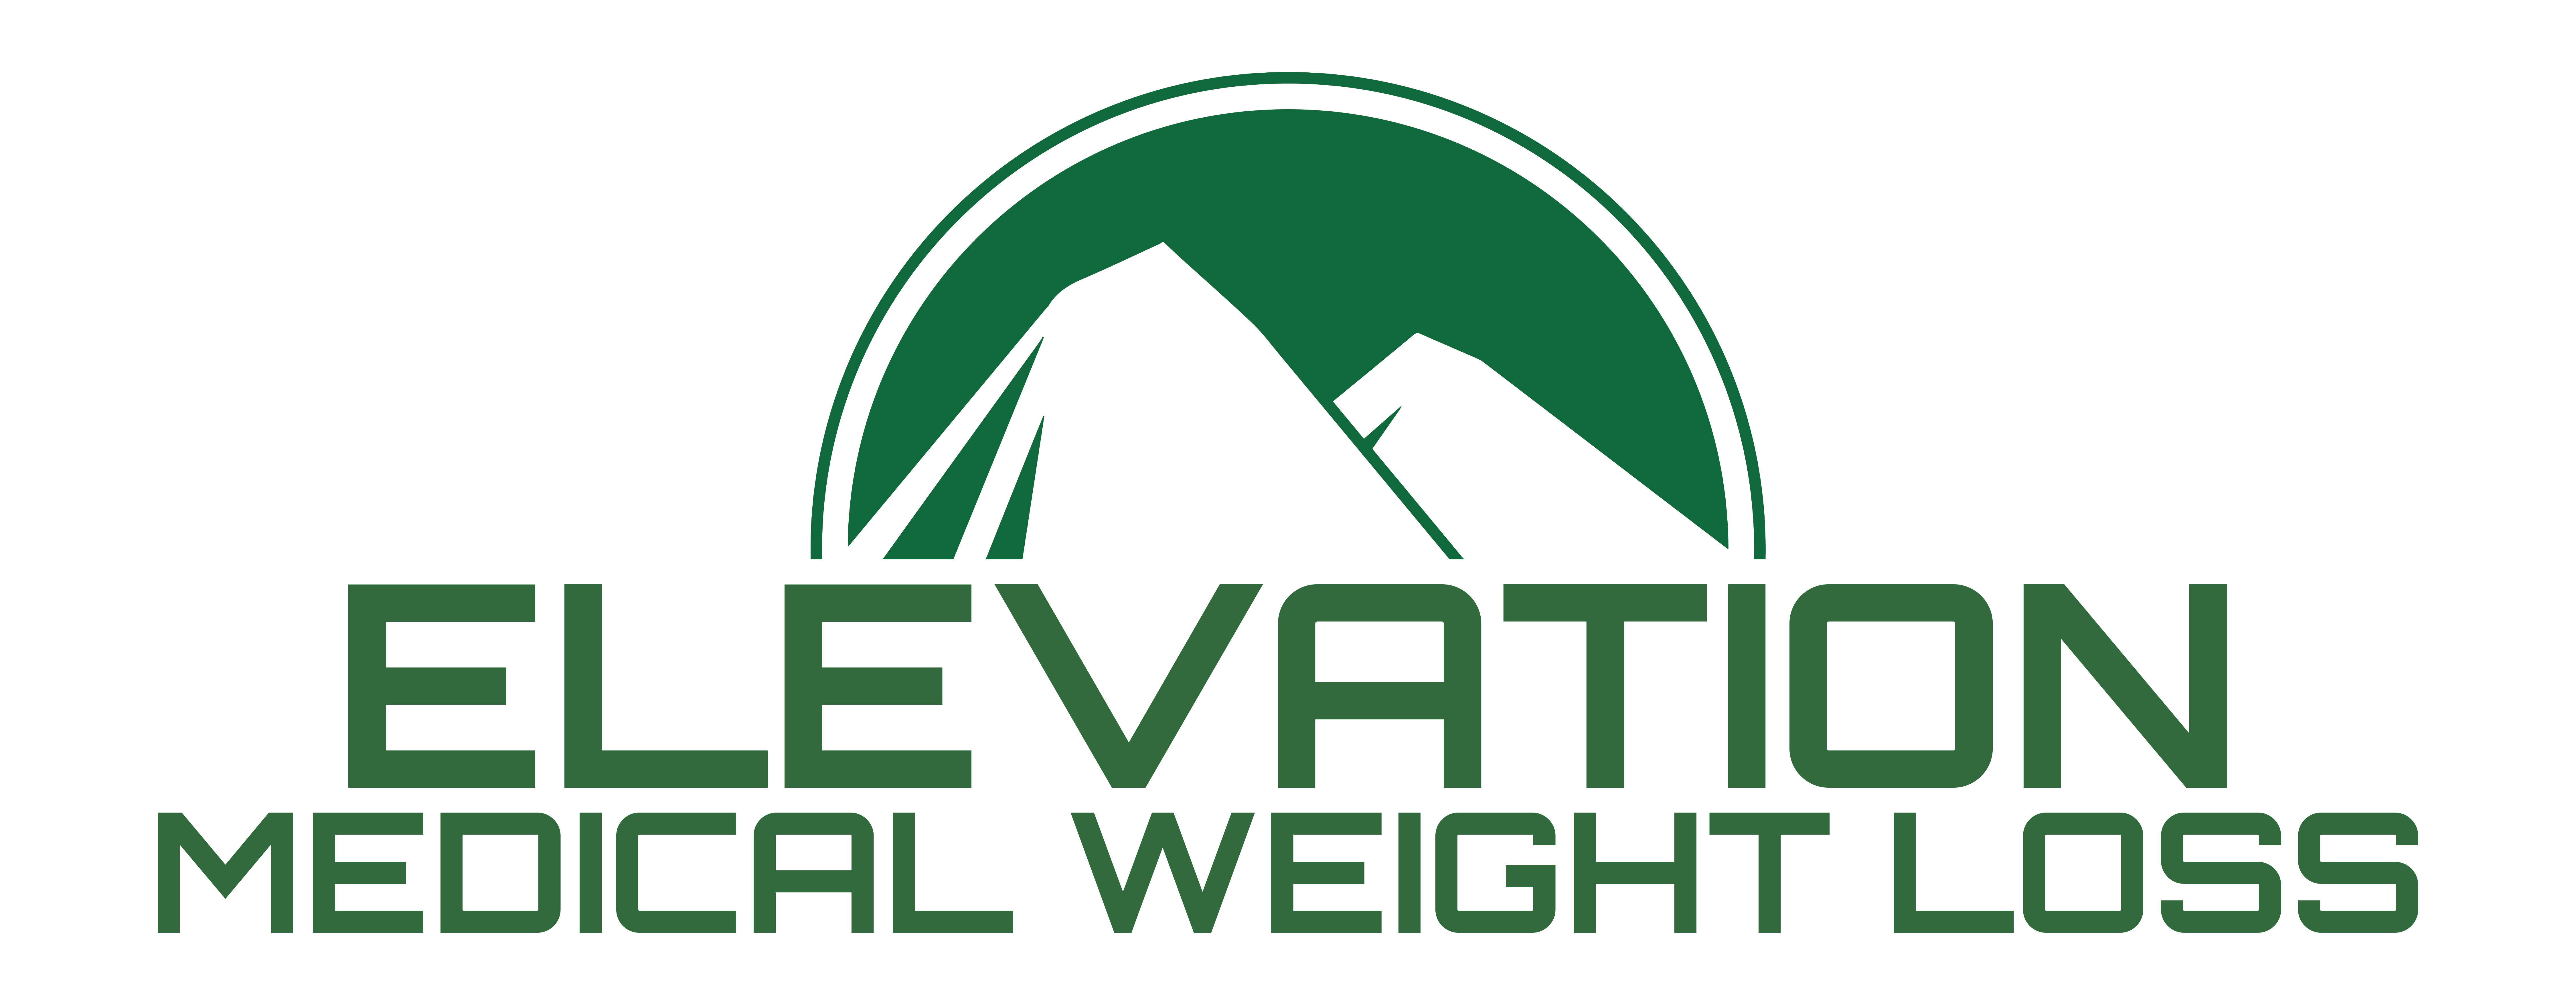 Sponsored by Elevation Medical Weight Loss